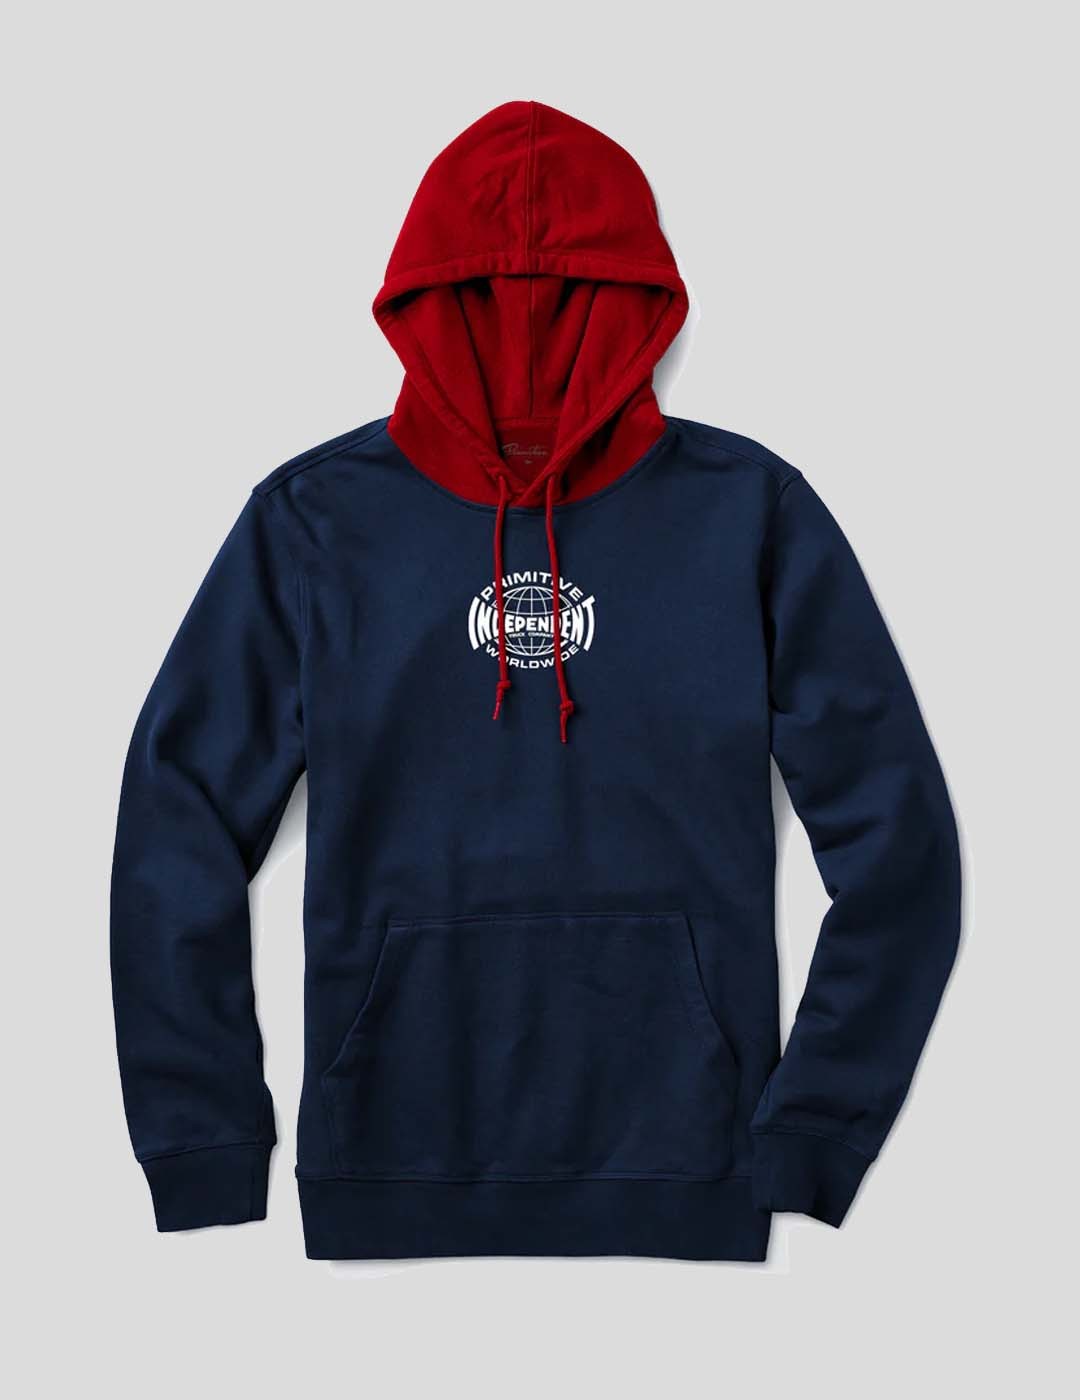 SUDADERA PRIMITIVE X INDEPENDENT GLOBAL TWO TONE HOOD NAVY